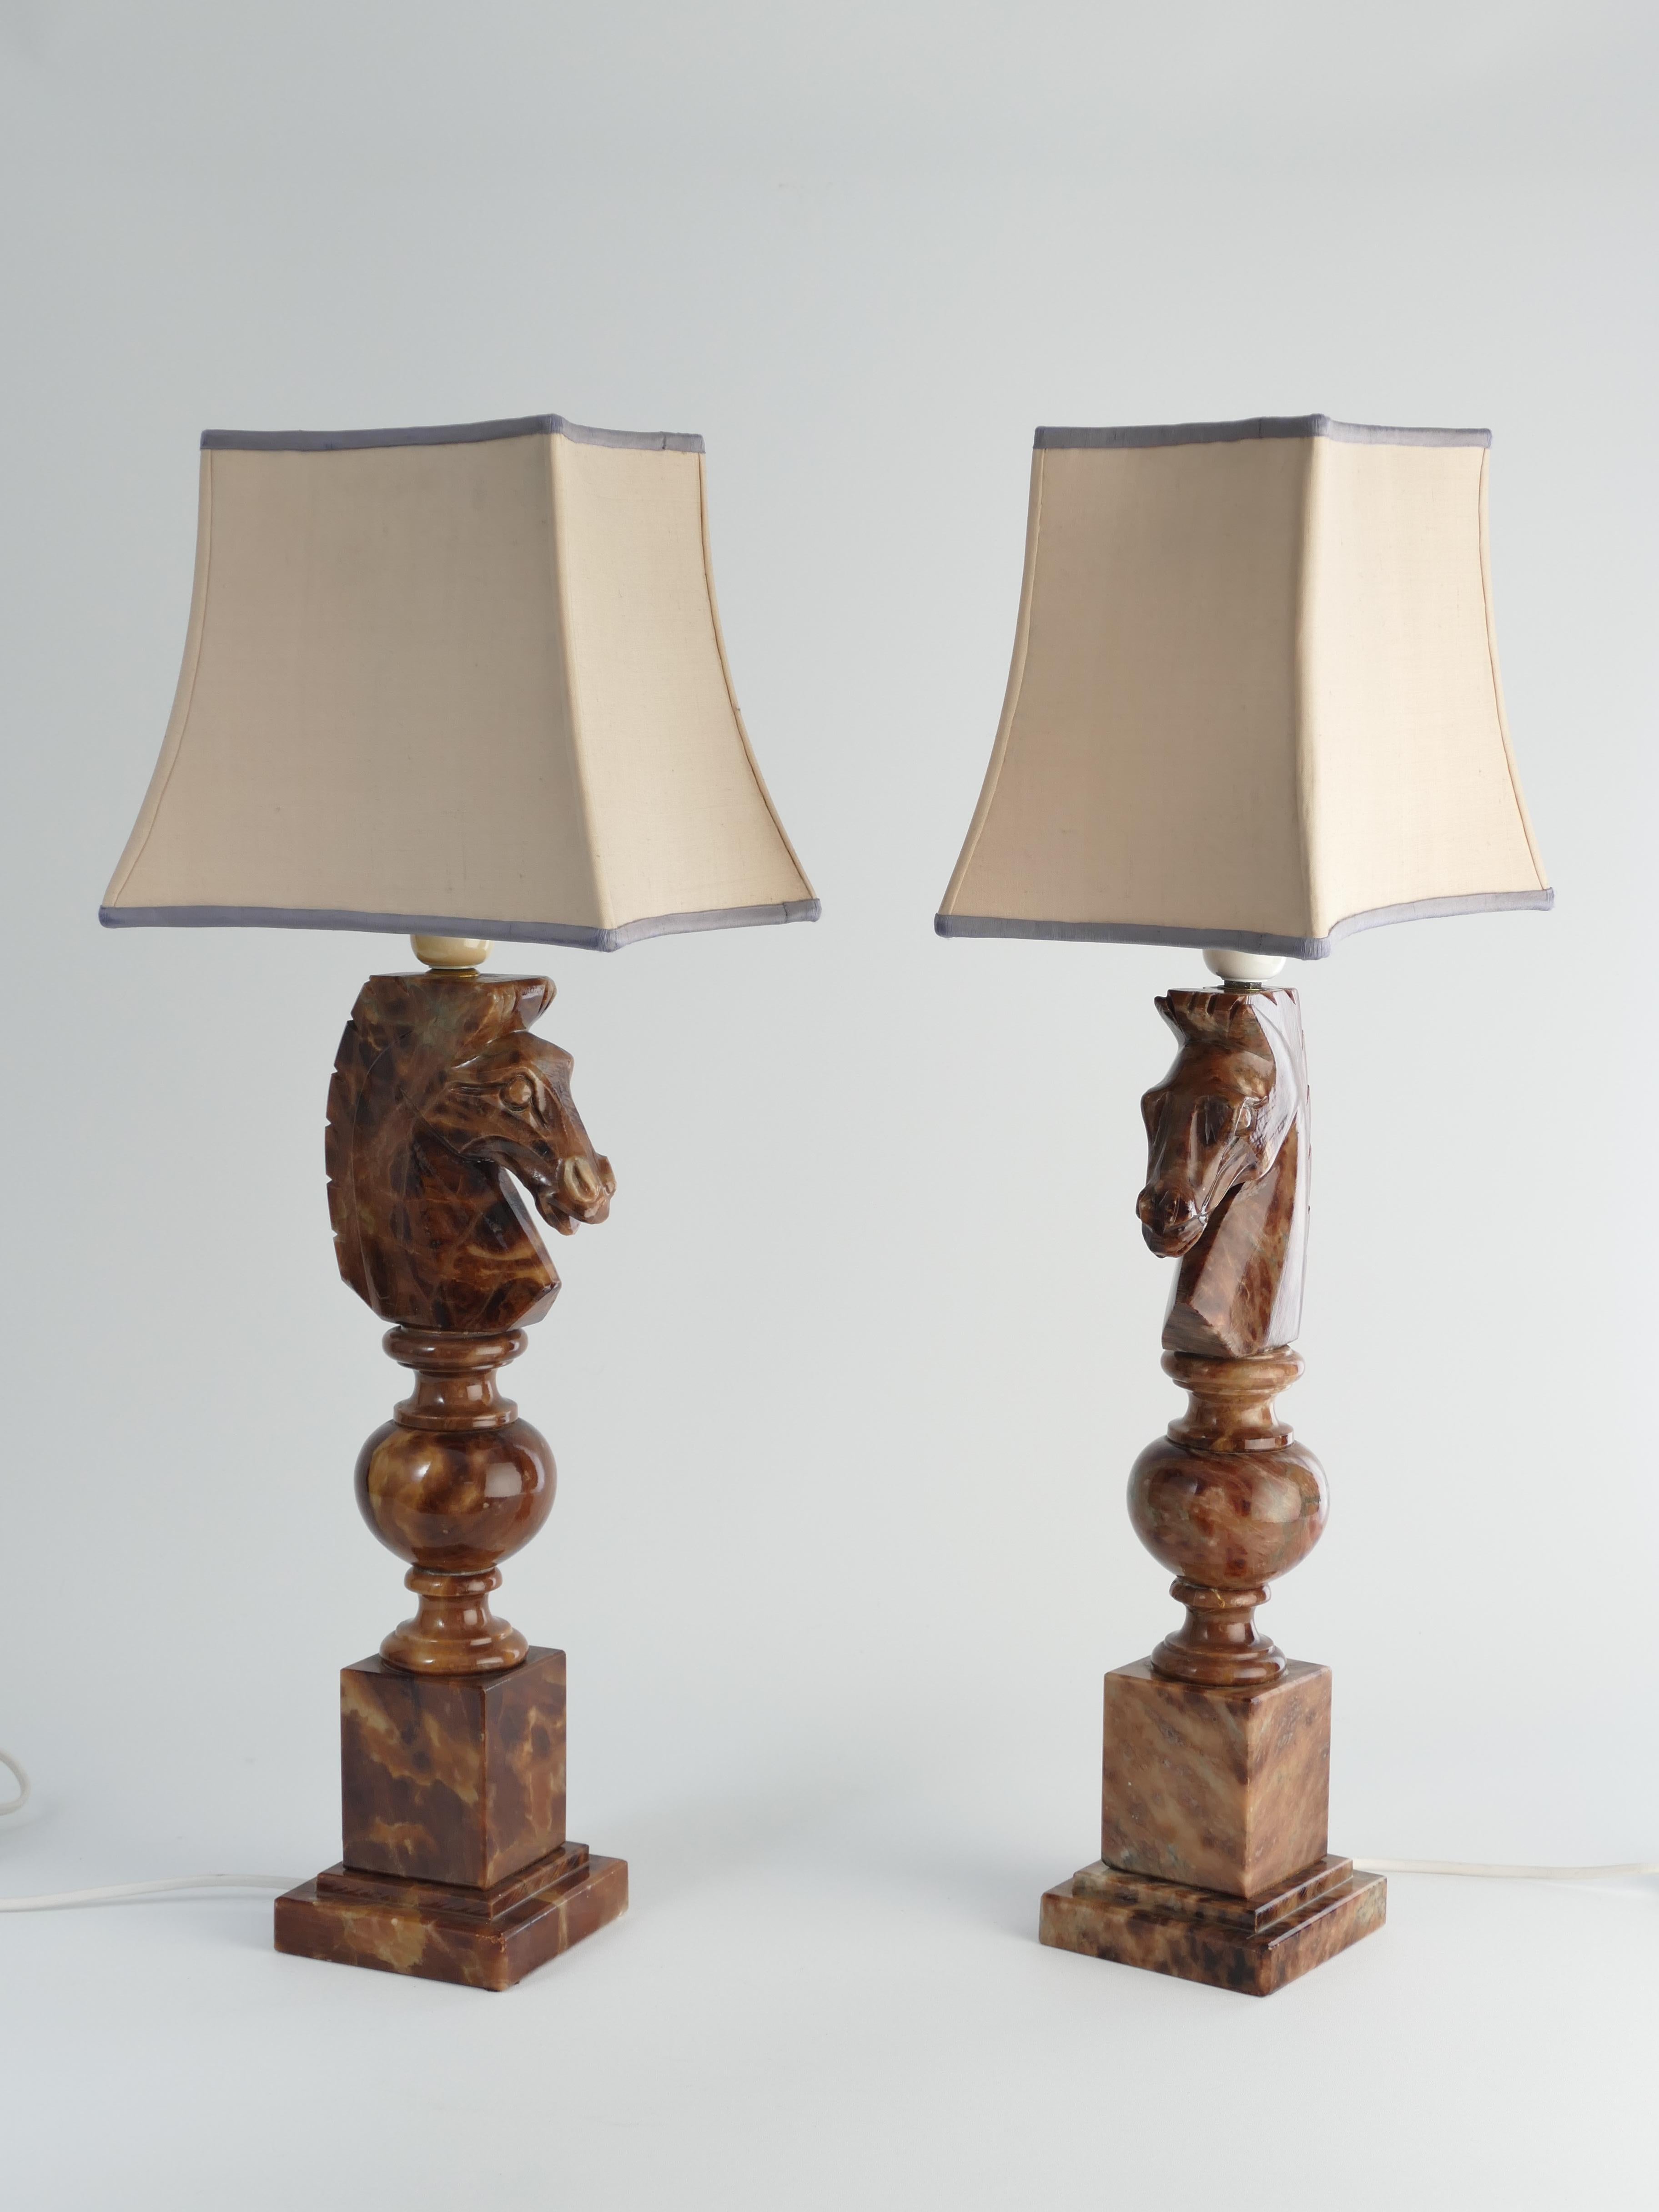 Hand-carved Brown Alabaster Knight Horse Head Table Lamps, Nordiska Kompaniet In Good Condition For Sale In Grythyttan, SE